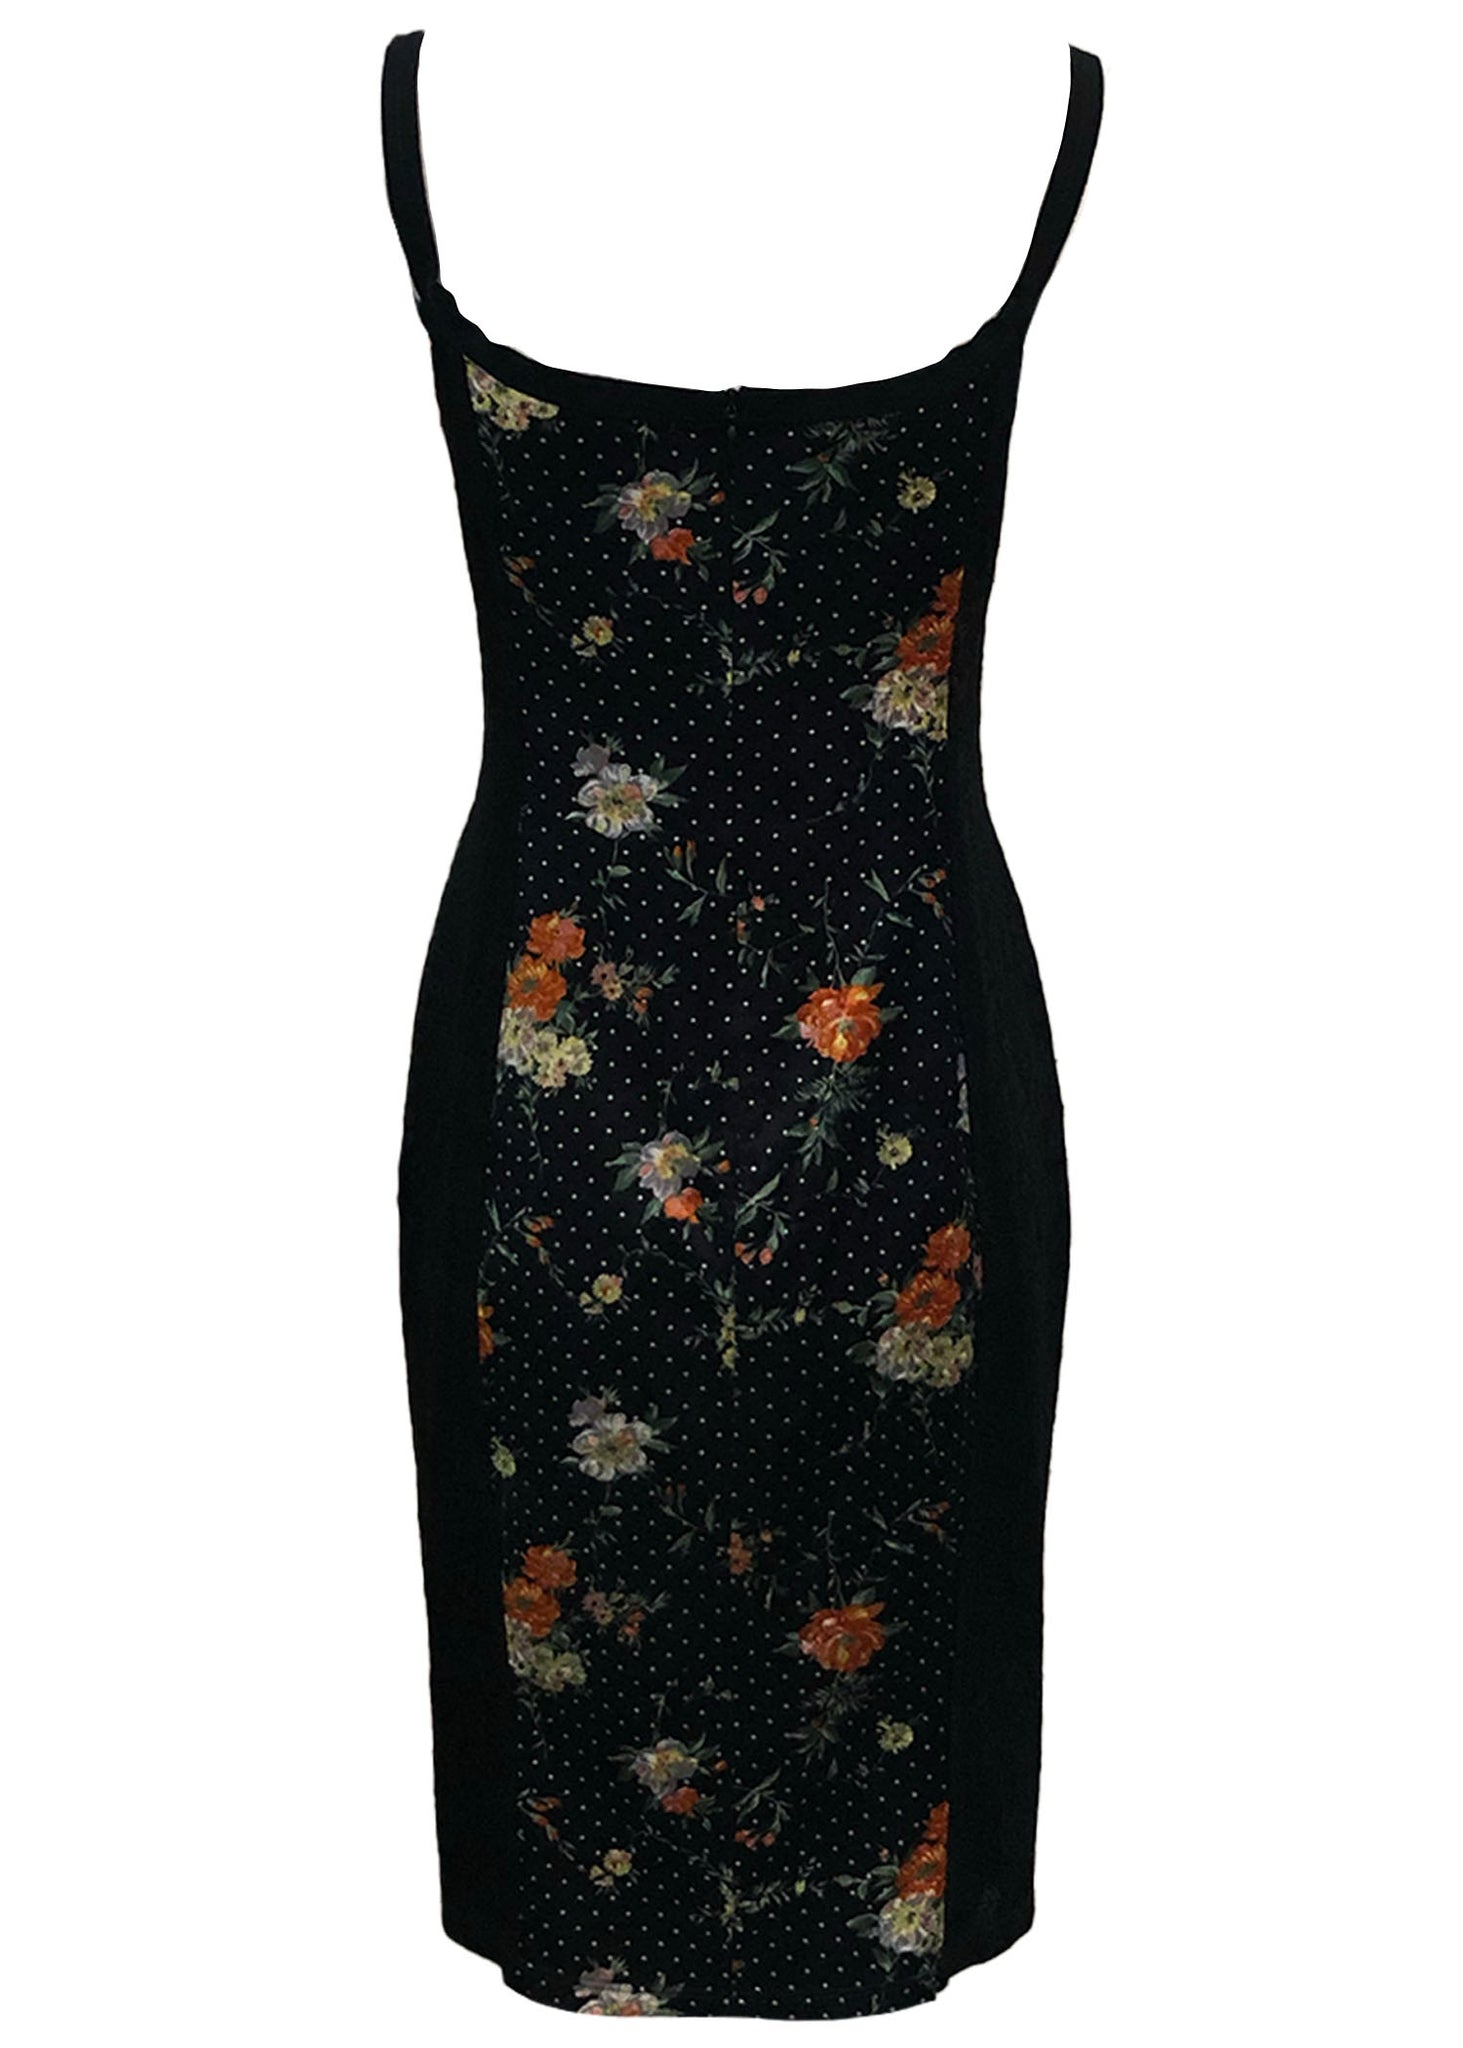  Dolce and Gabbana Iconic early 2000s Black Floral Slip Dress Trimmed in Lace BACK 3 of 5